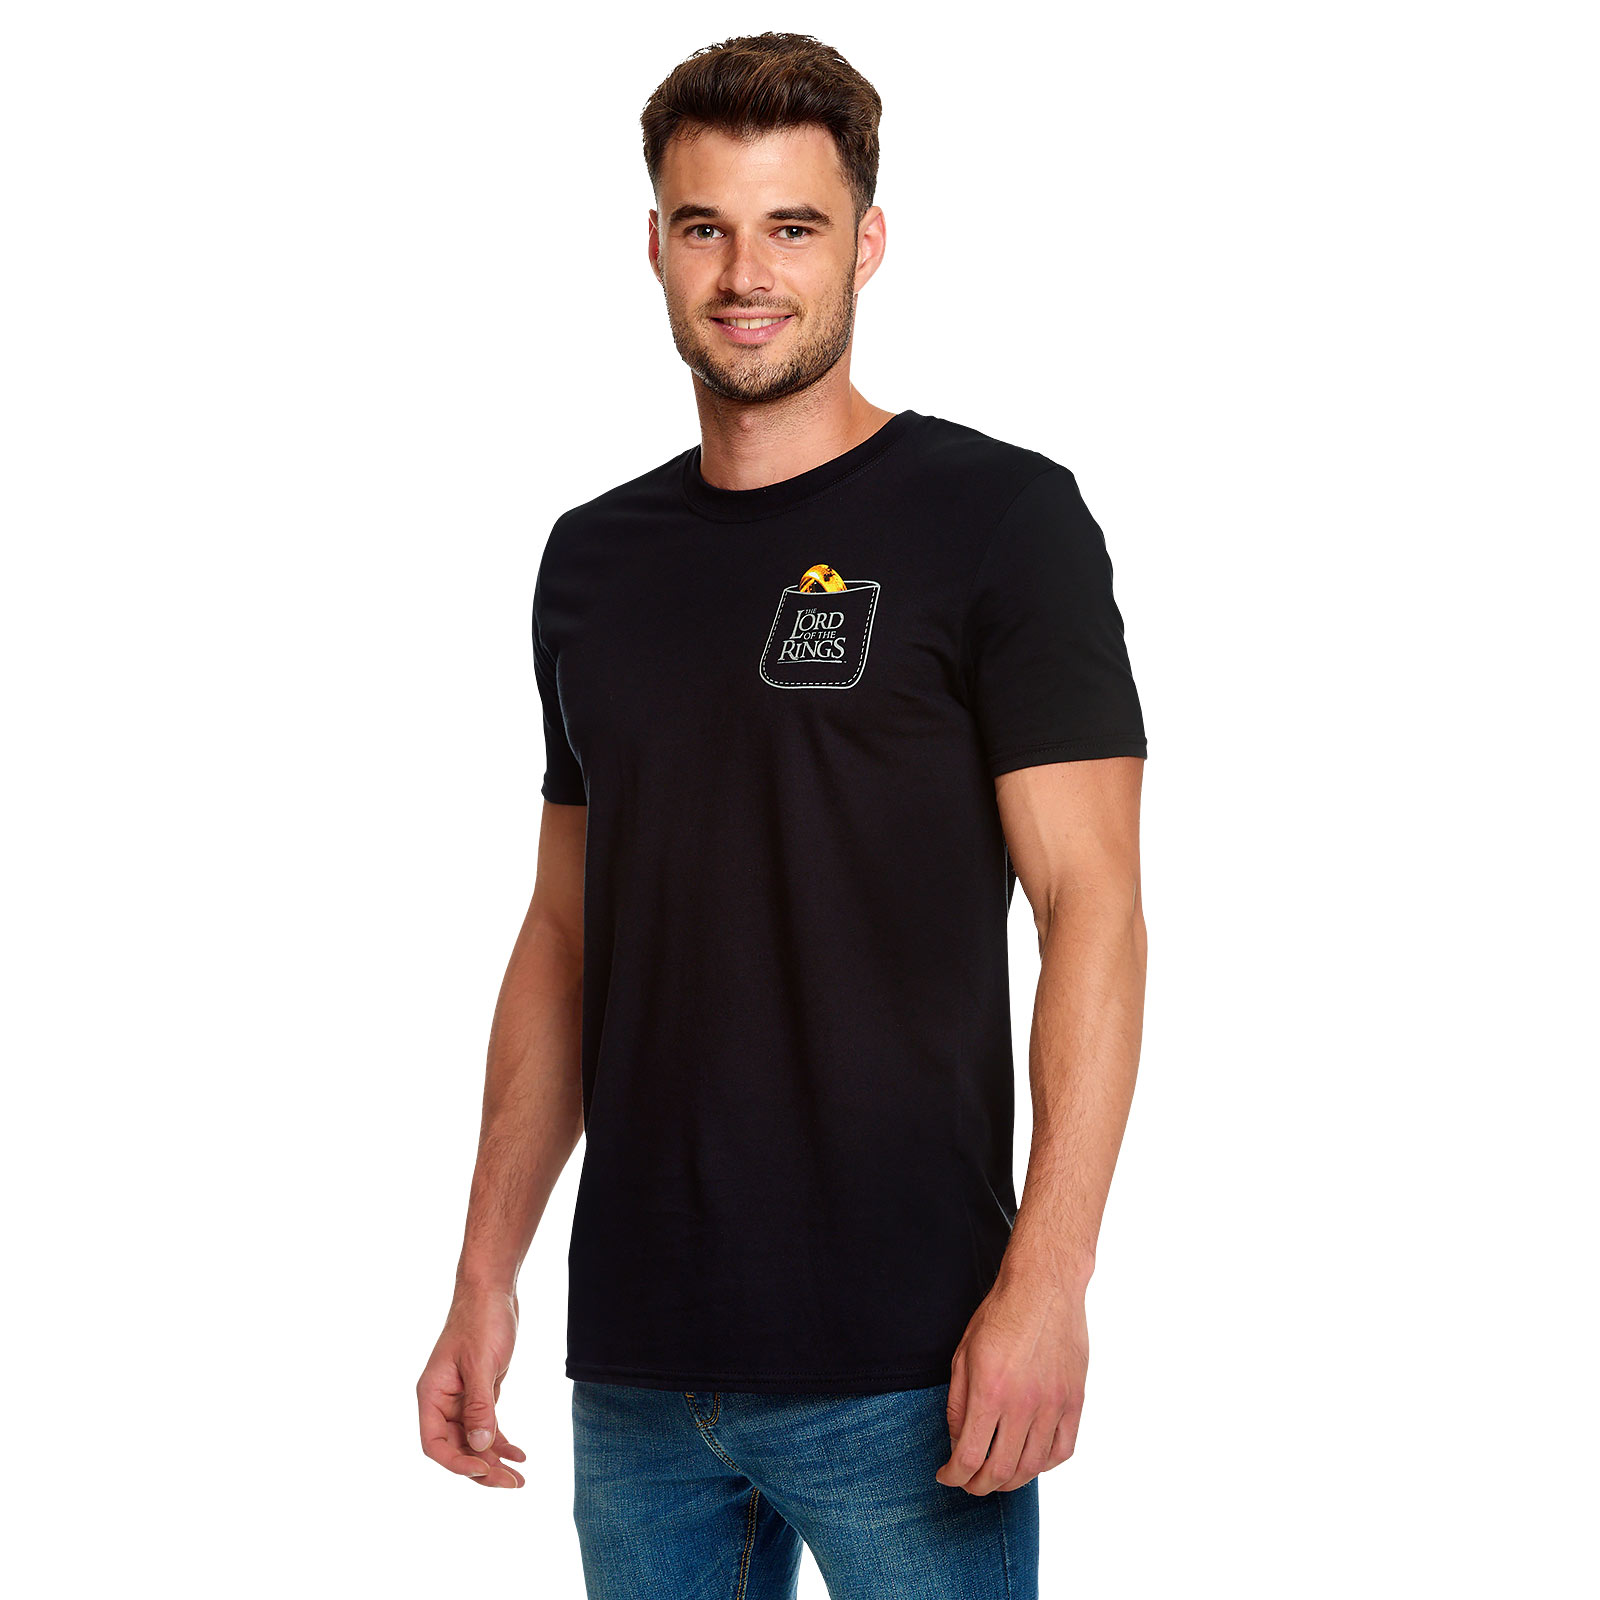 Lord of the Rings - The One Ring Pocket T-Shirt Black